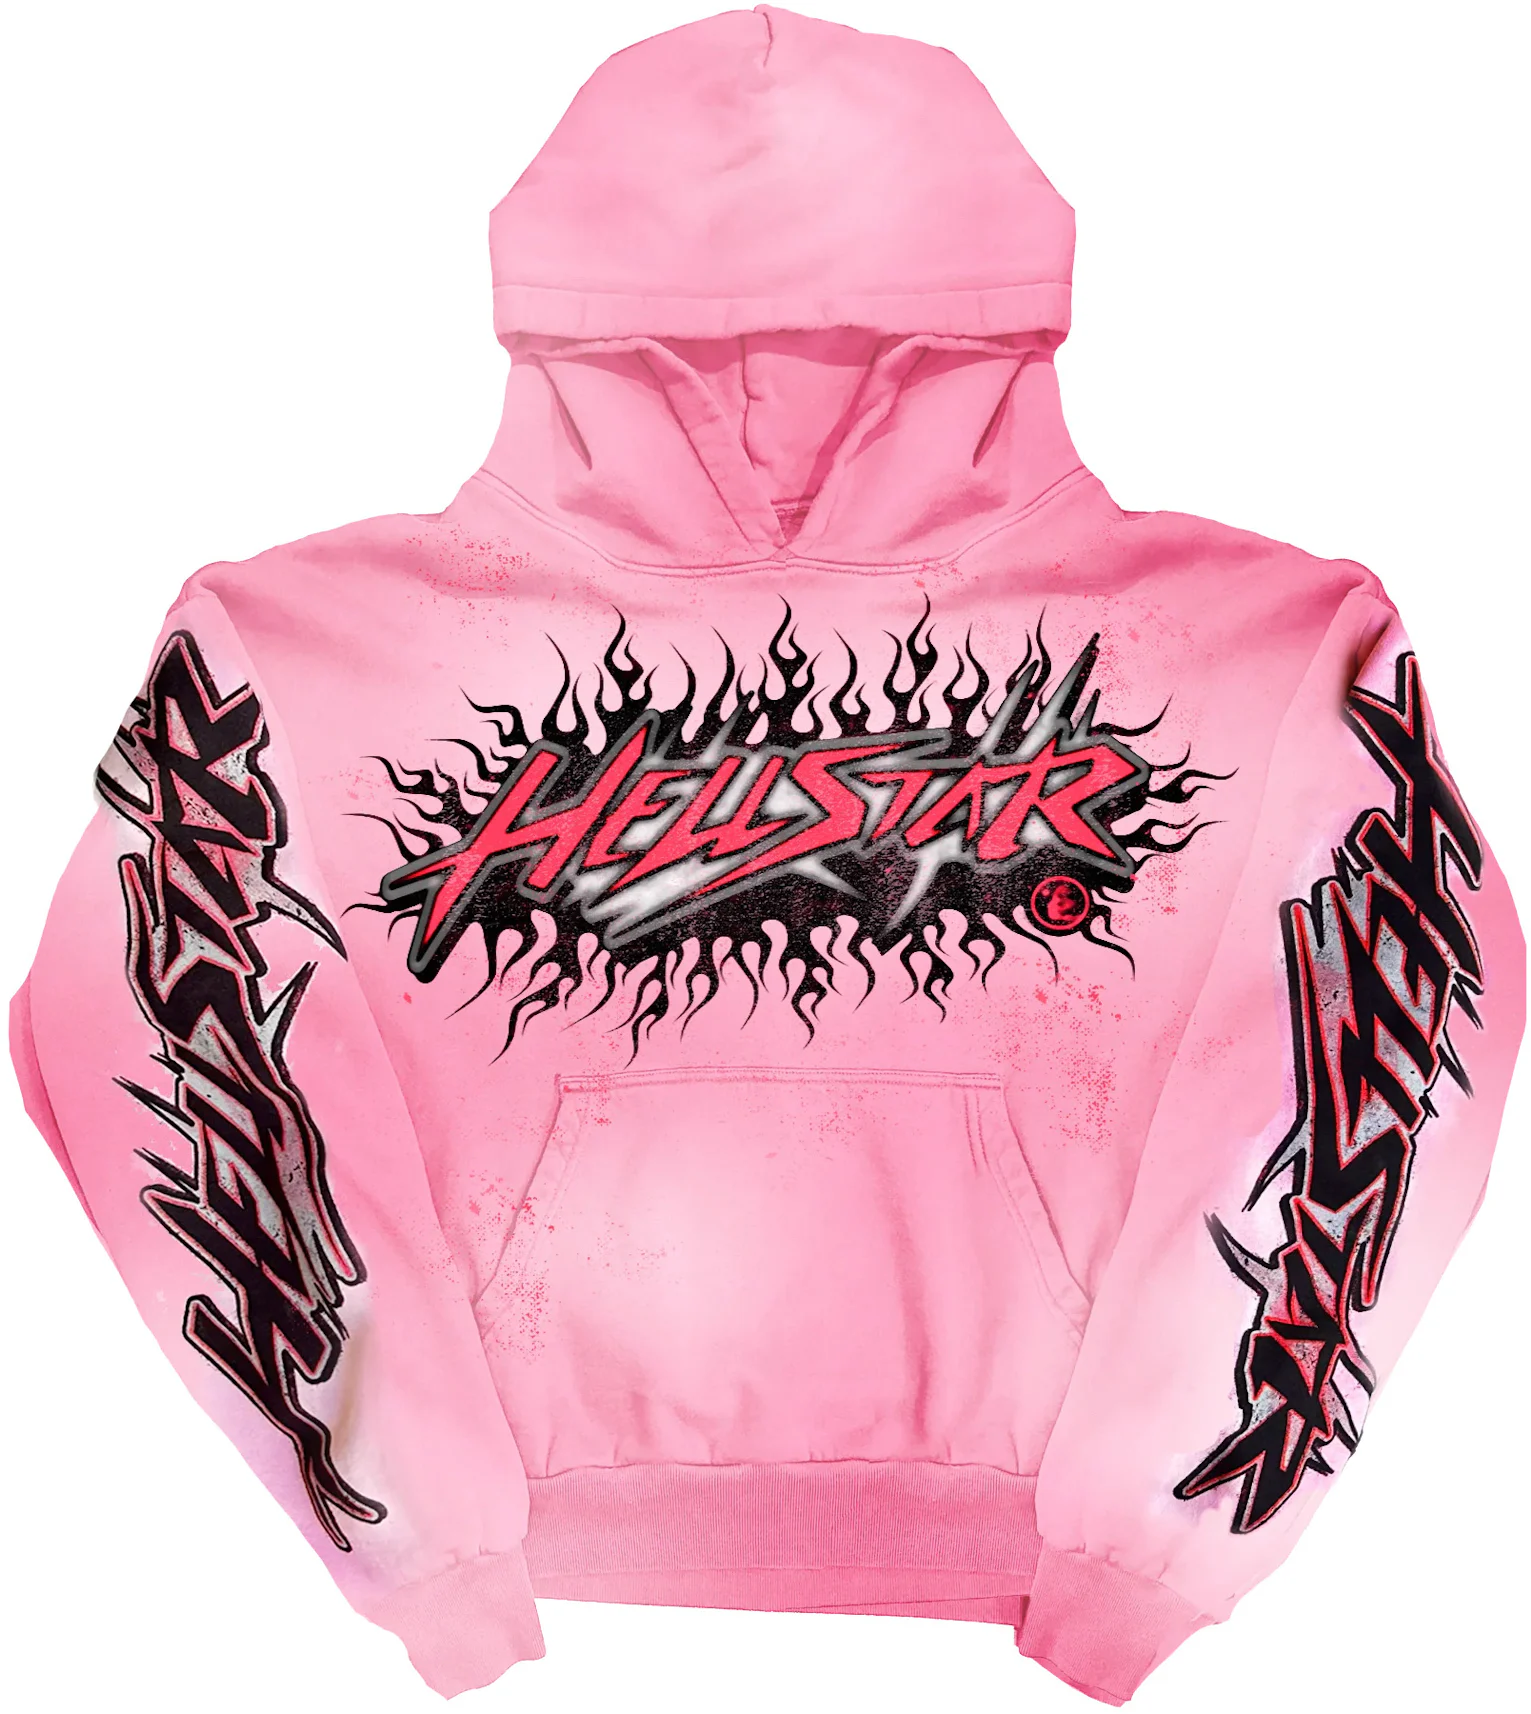 https://images.stockx.com/images/Hellstar-Brainwashed-Without-Brain-Hoodie-Pink.jpg?fit=fill&bg=FFFFFF&w=1200&h=857&fm=webp&auto=compress&dpr=2&trim=color&updated_at=1692432887&q=60